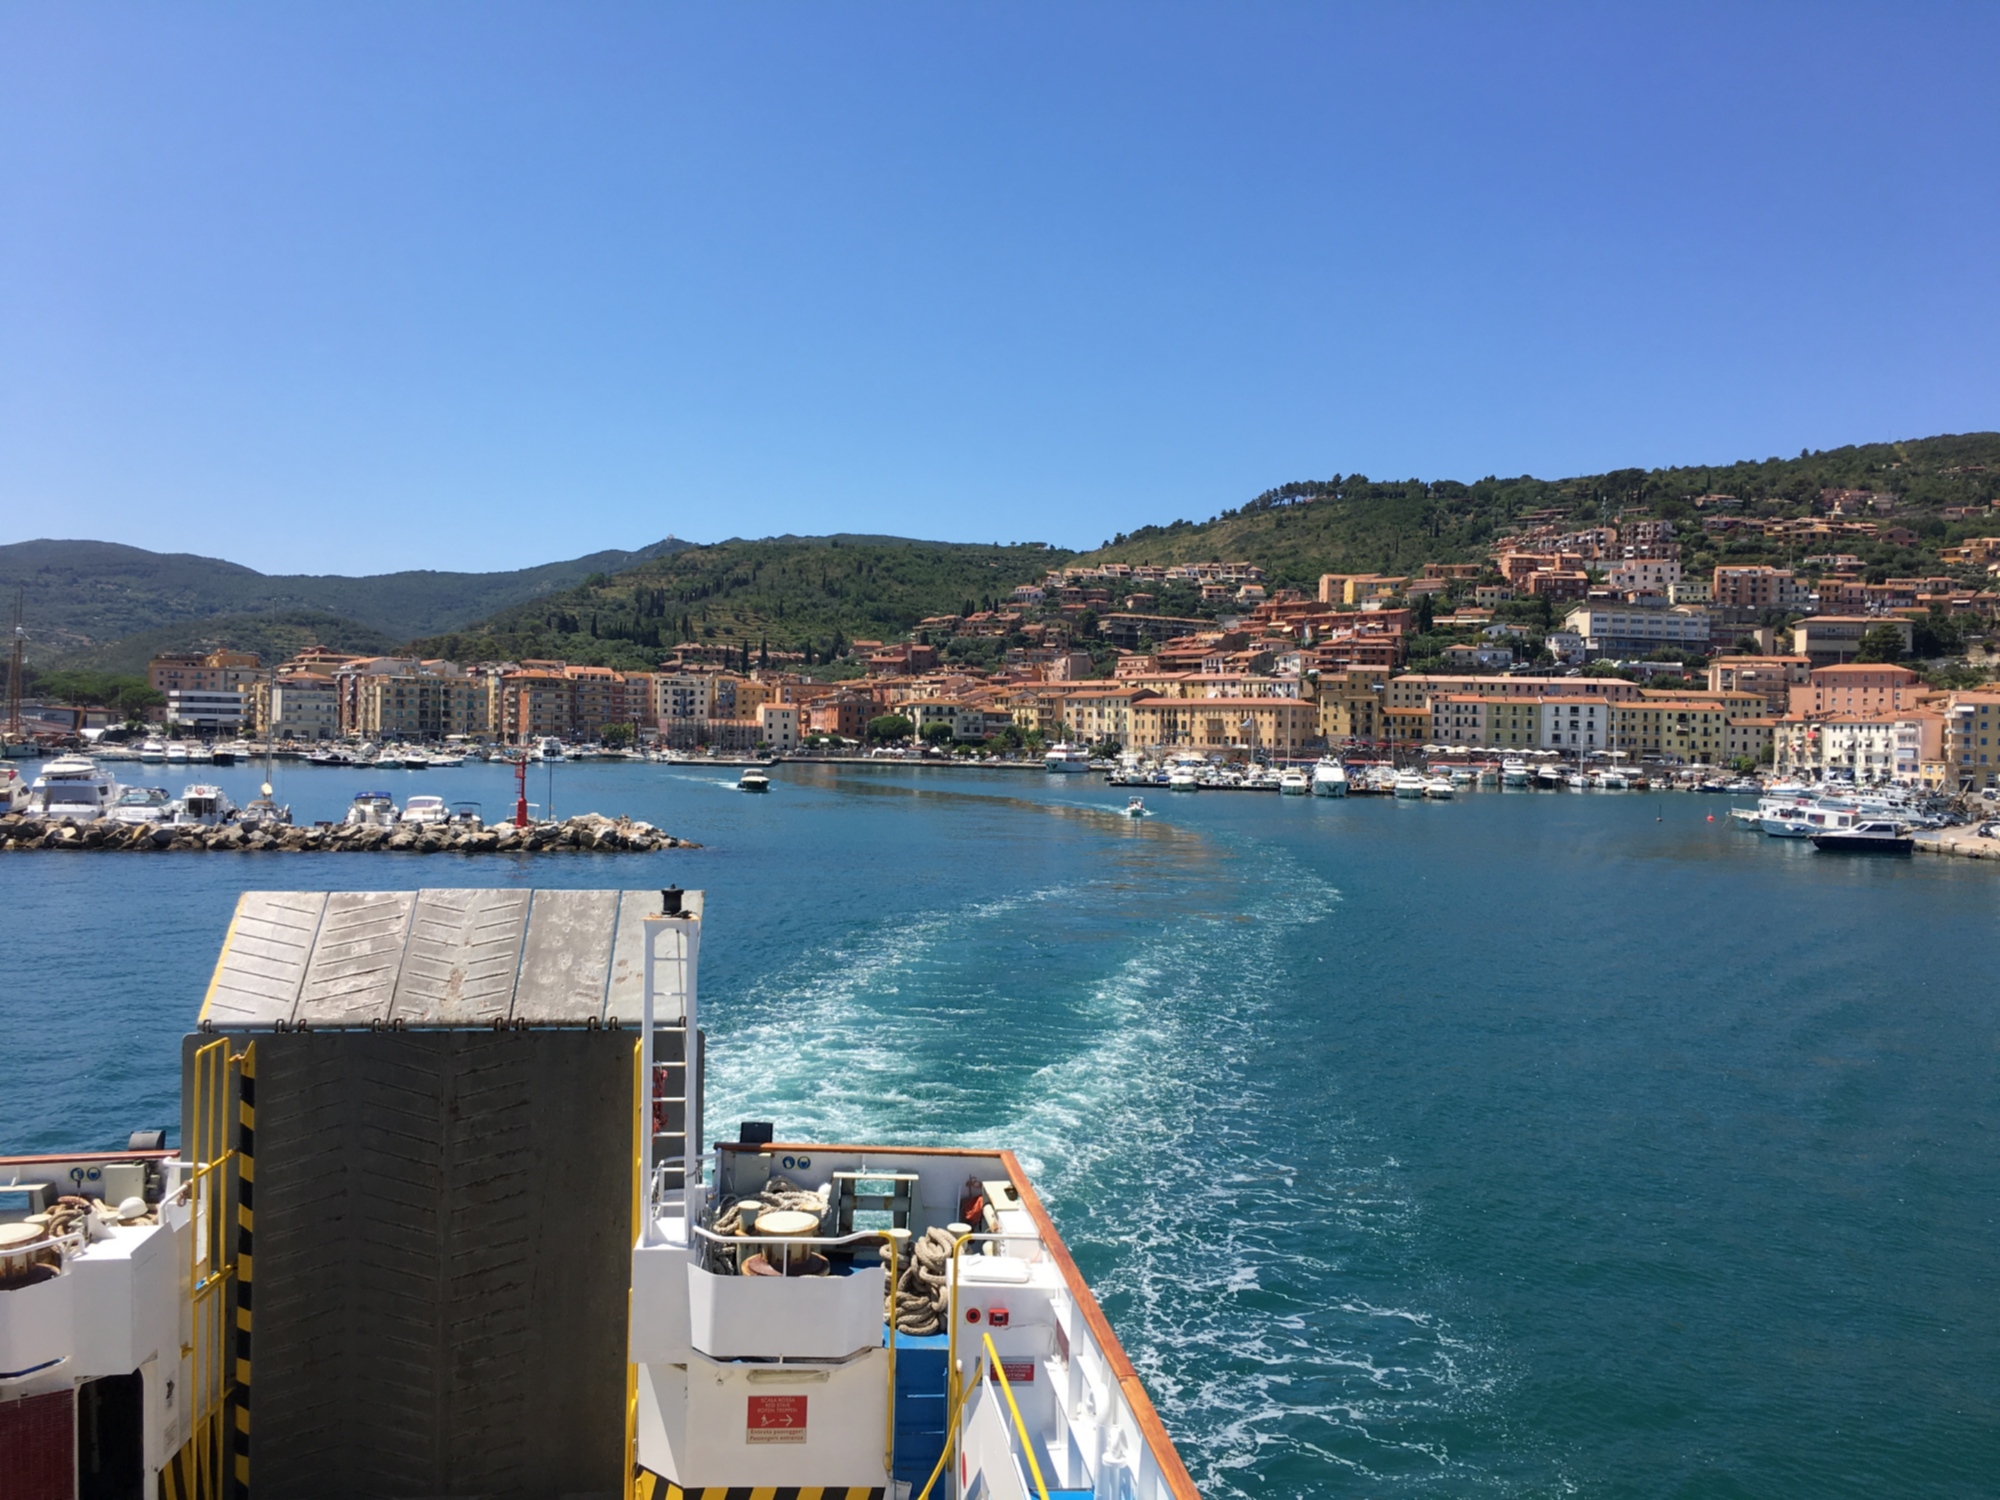 Giglio Island from a ferry